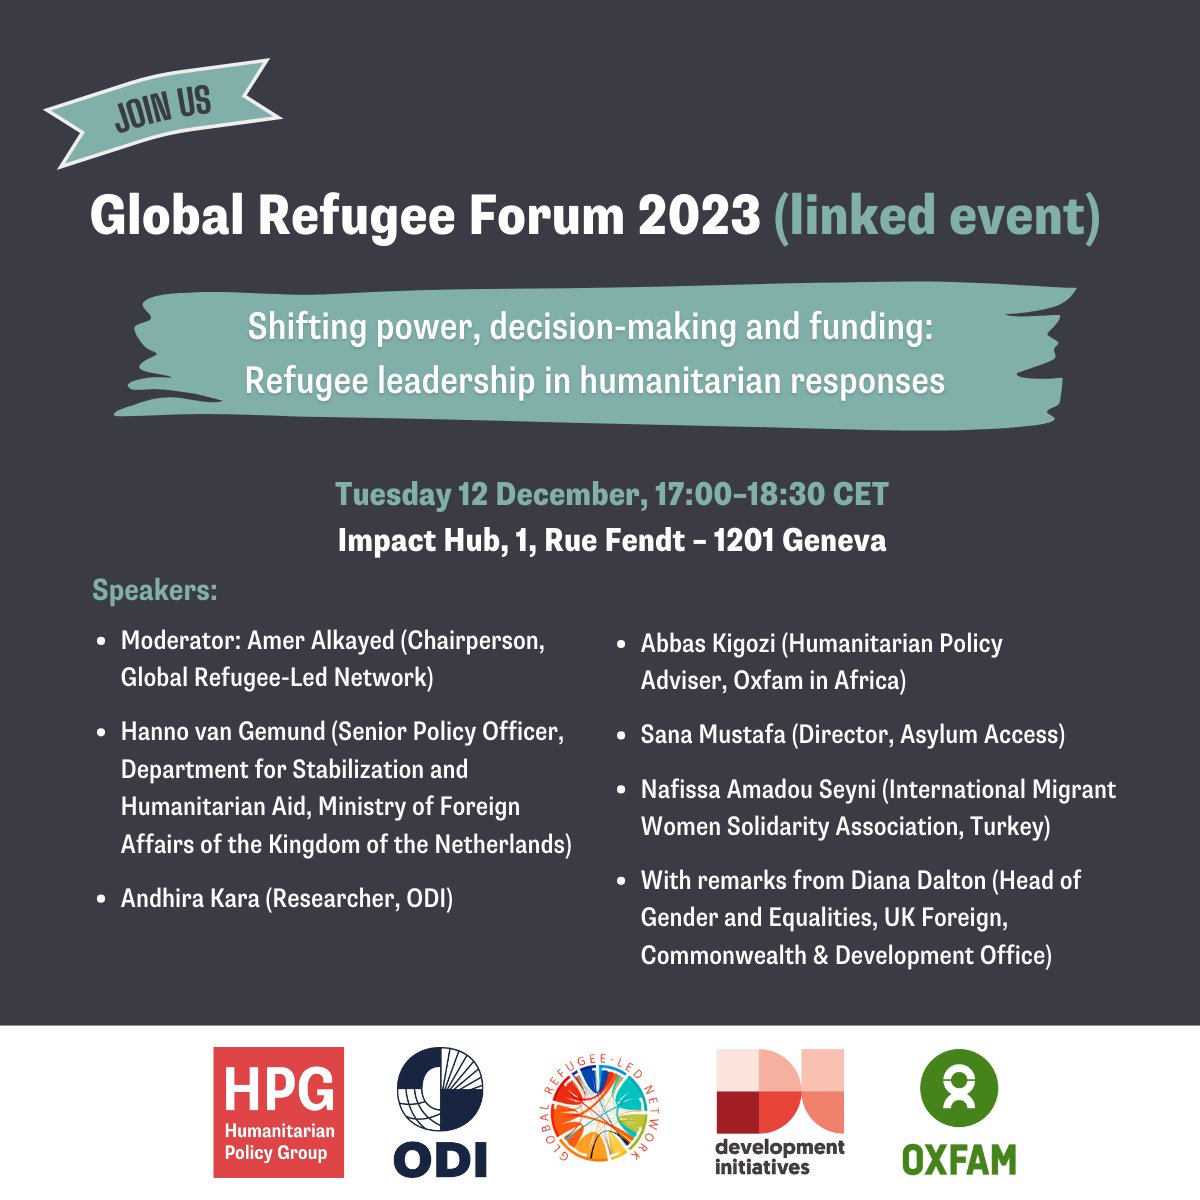 How can we do more to shift power, decision-making & funding to refugees in humanitarian responses? Join us to discuss this on 12 December 5-6.30pm at the Impact Hub in Geneva. #GlobalRefugeeForum #GRF2023 @GRNRefugees @hpg_odi @devintorg @asylumaccess @FCDOGovUK @NetherlandsMoFA